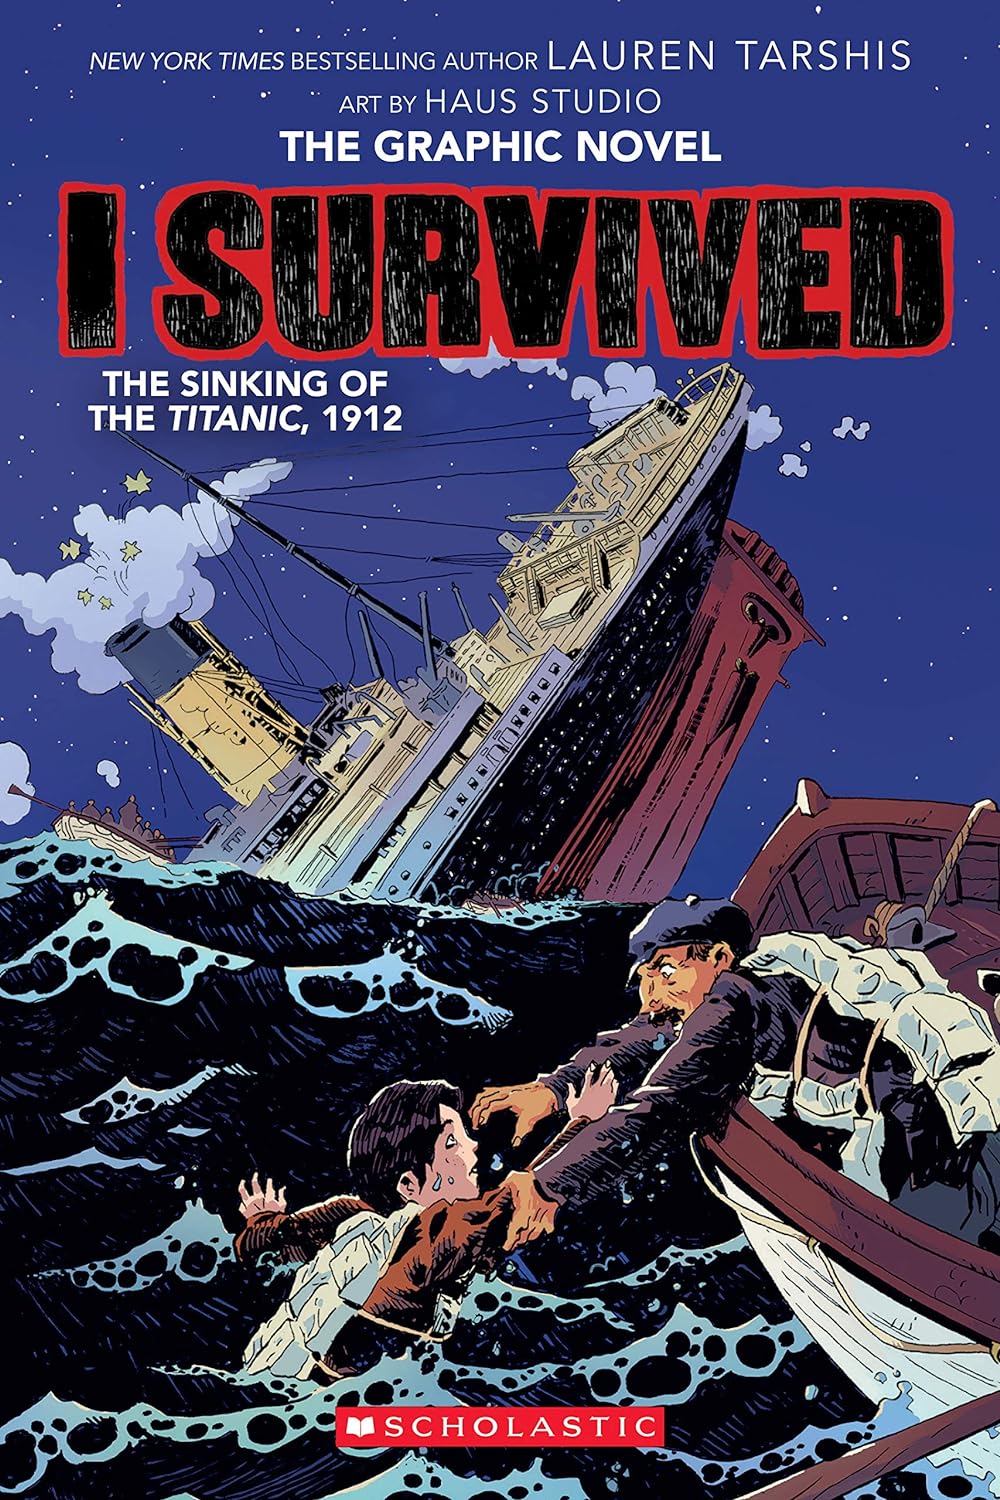 I Survived - Graphic Novel: The Sinking of the Titanic, 1912 (Paperback) Lauren Tarshis